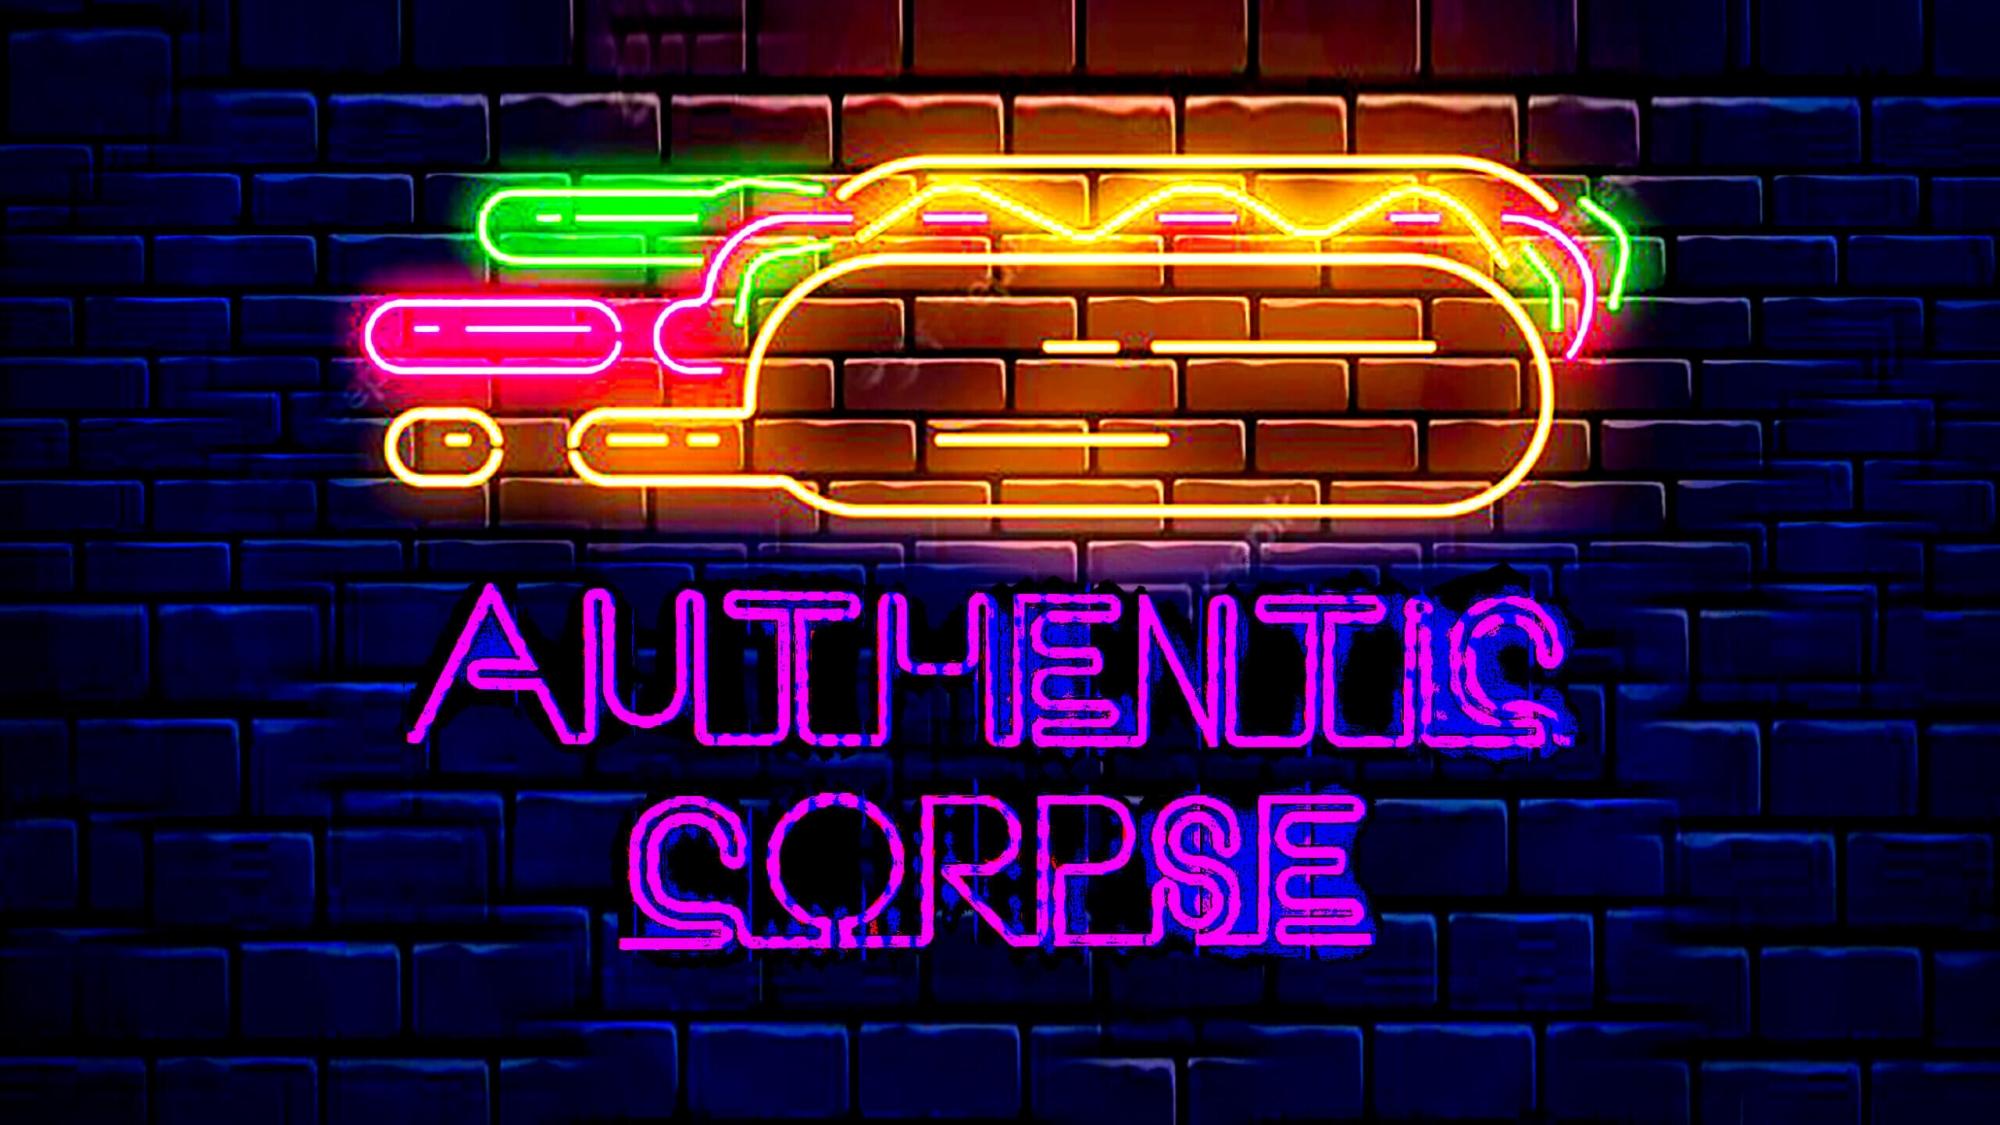 'Authentic Corpse' written in neon lights